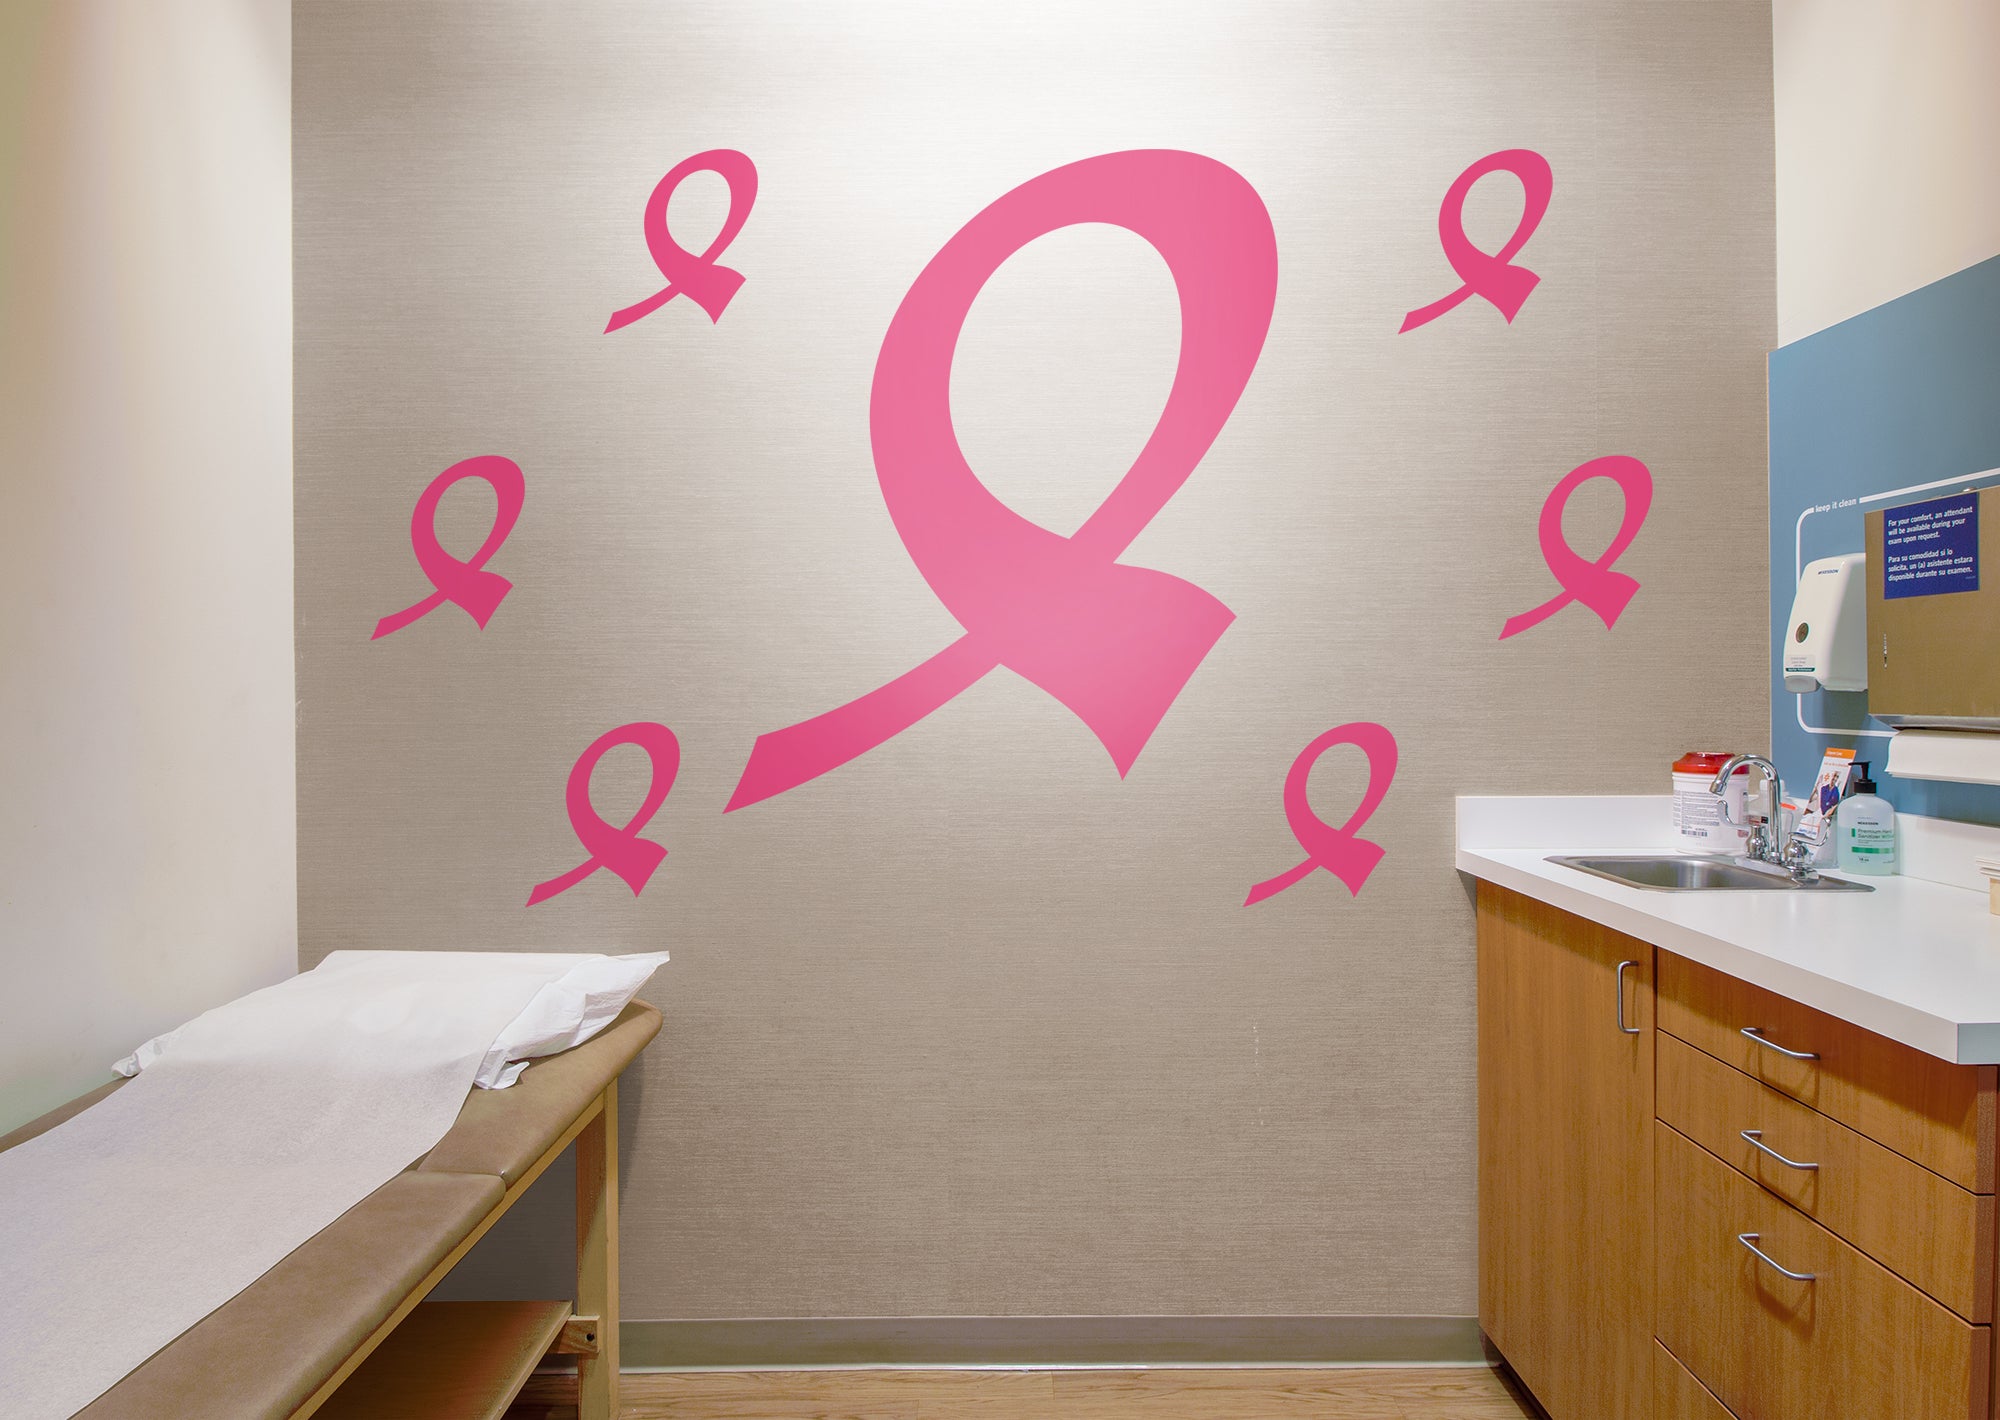 Colors of Cancer Ribbons: American Cancer Society Removable Wall Decal Giant Breast Cancer Ribbon + 6 Decals (35"W x 42"H) by Fa